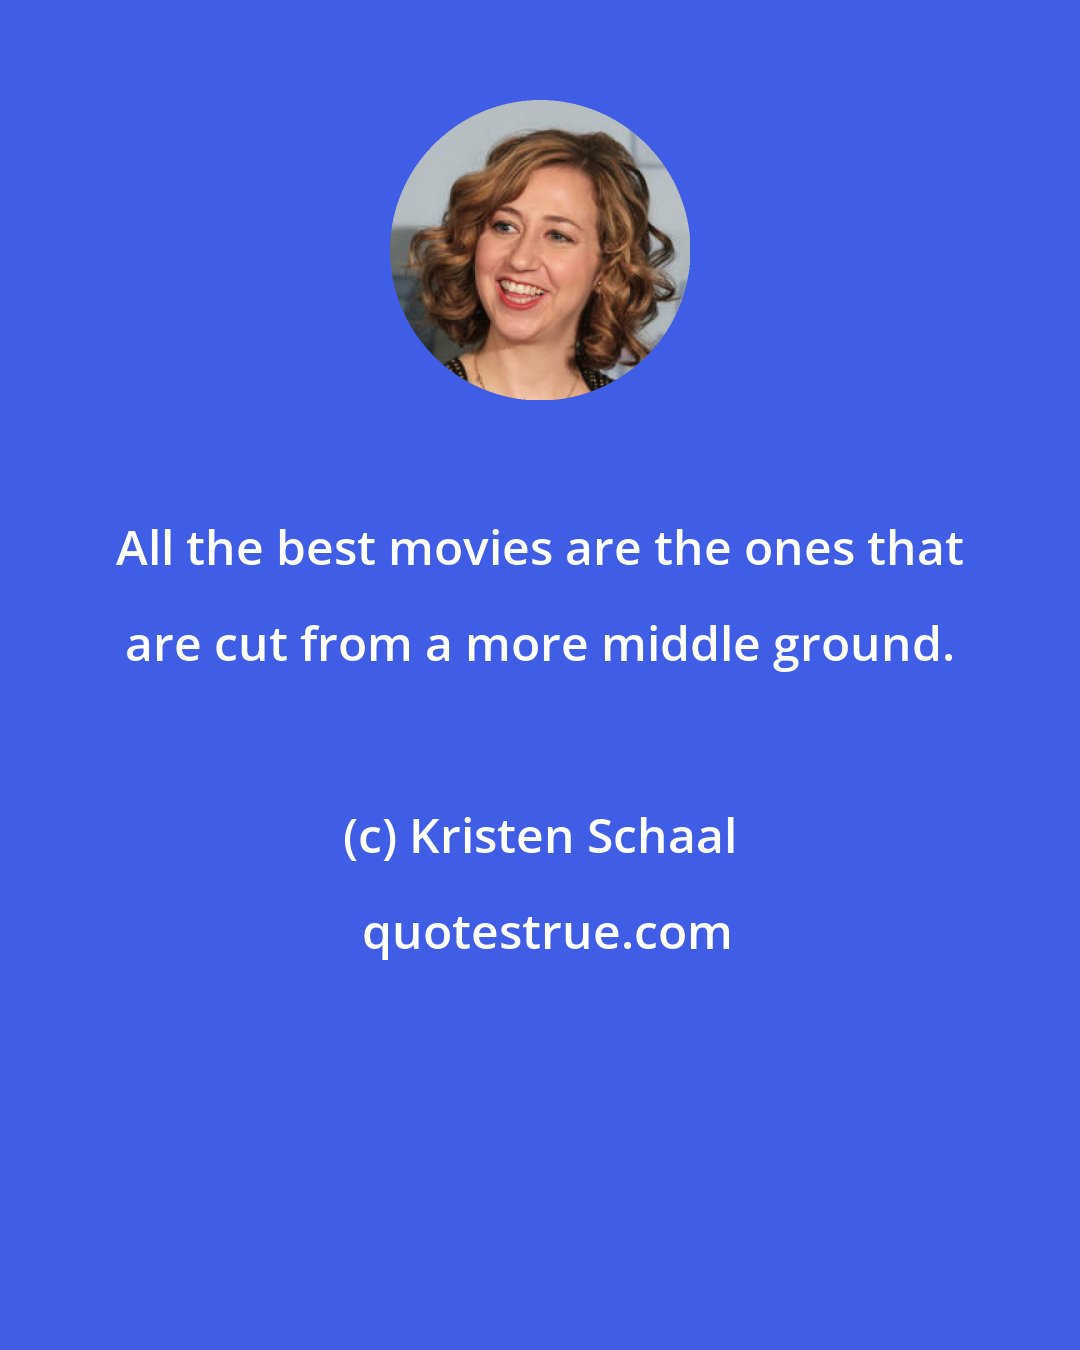 Kristen Schaal: All the best movies are the ones that are cut from a more middle ground.